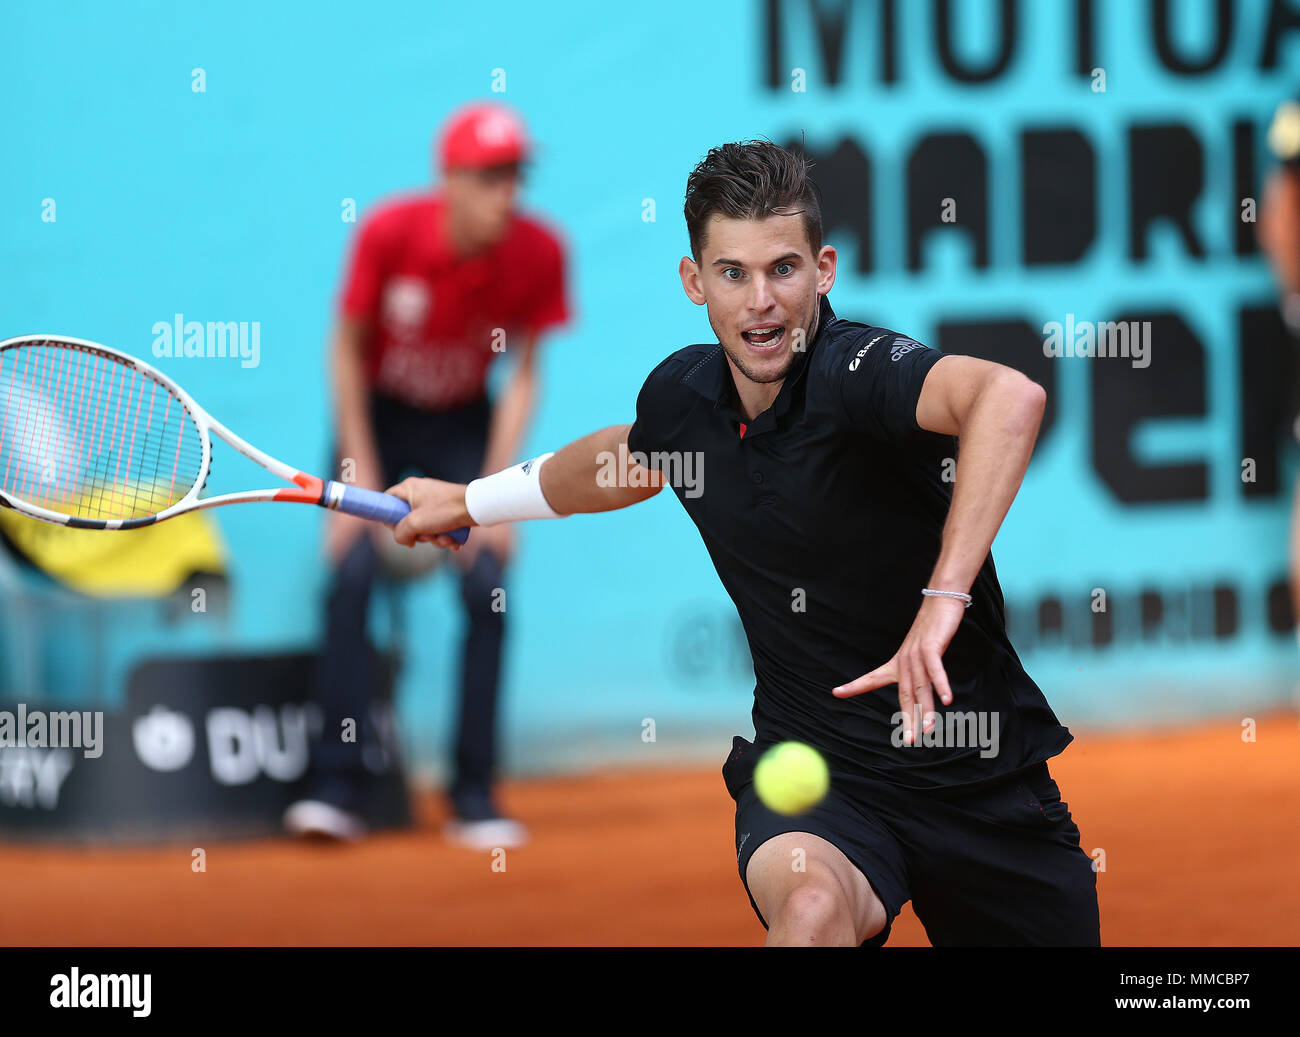 Madrid, Spain. 10th May, 2018. Dominic Thiem of Austria plays forehand against Borna Coric of Croatia in their third round match during day six of the Mutua Madrid Open tennis tournament at the Caja Magica. Credit: SOPA Images Limited/Alamy Live News Stock Photo